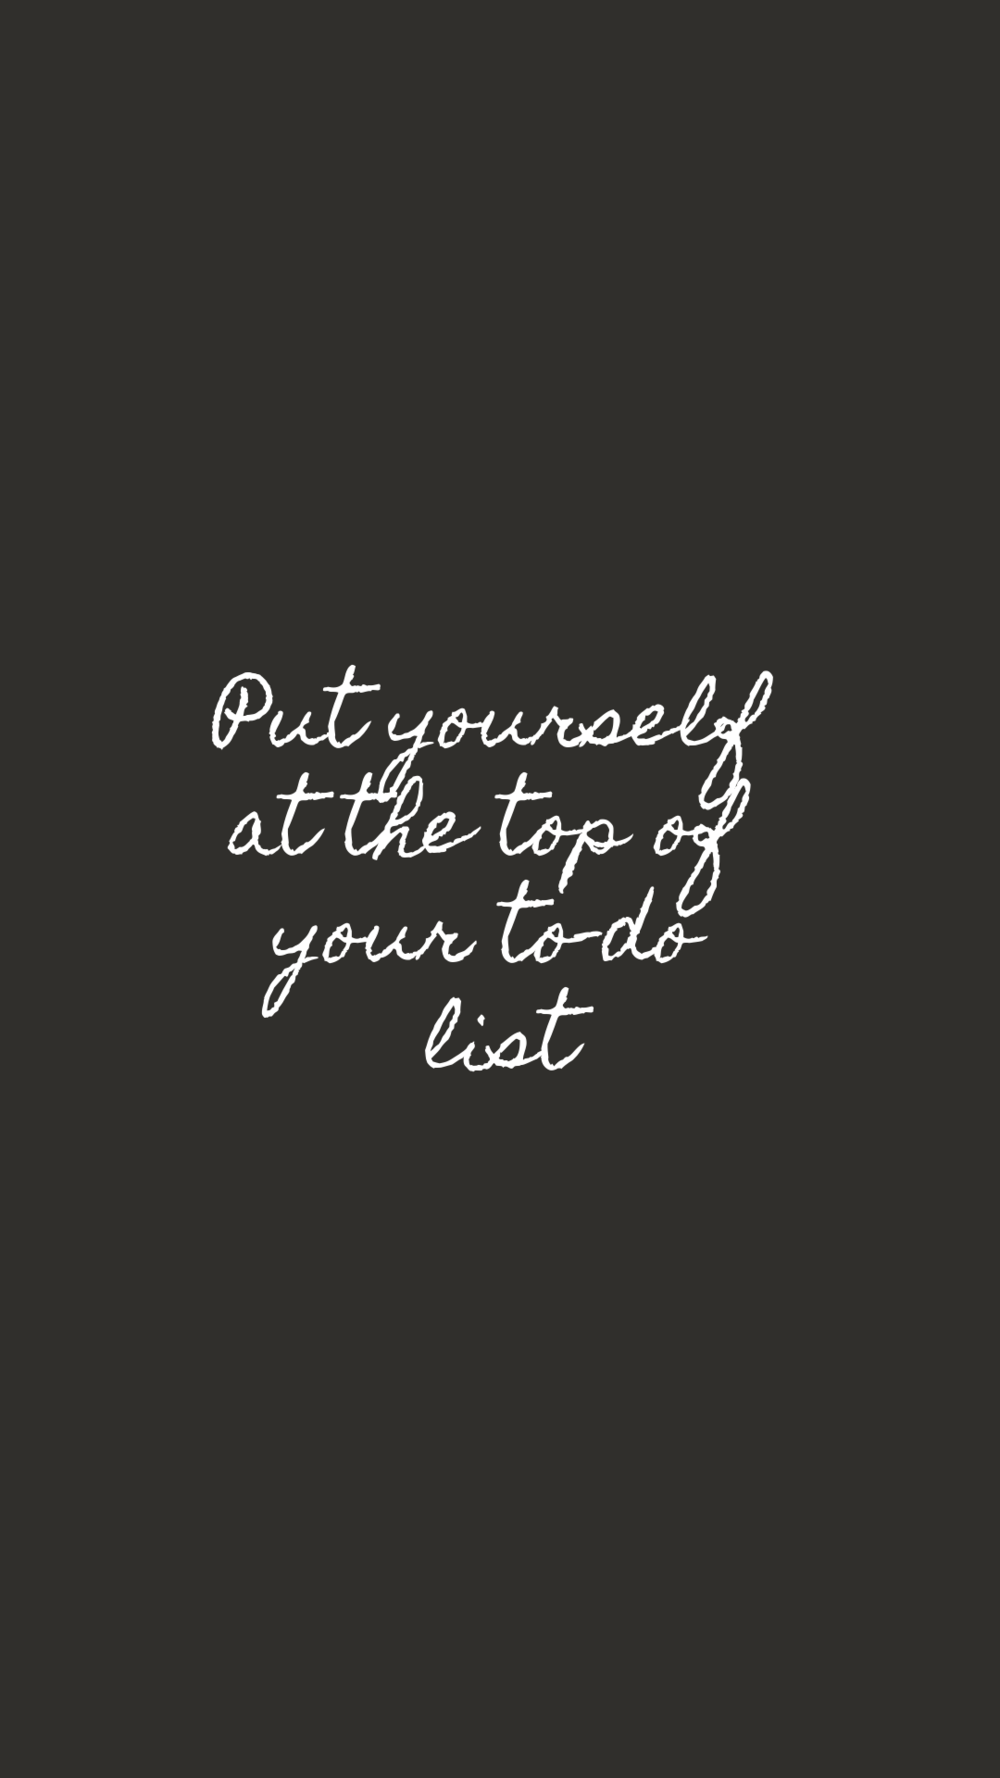 Put yourself at the top of your to-do list | Empowering Quotes for Your Phone Screen Background | Miranda Schroeder Blog | www.mirandaschroeder.com